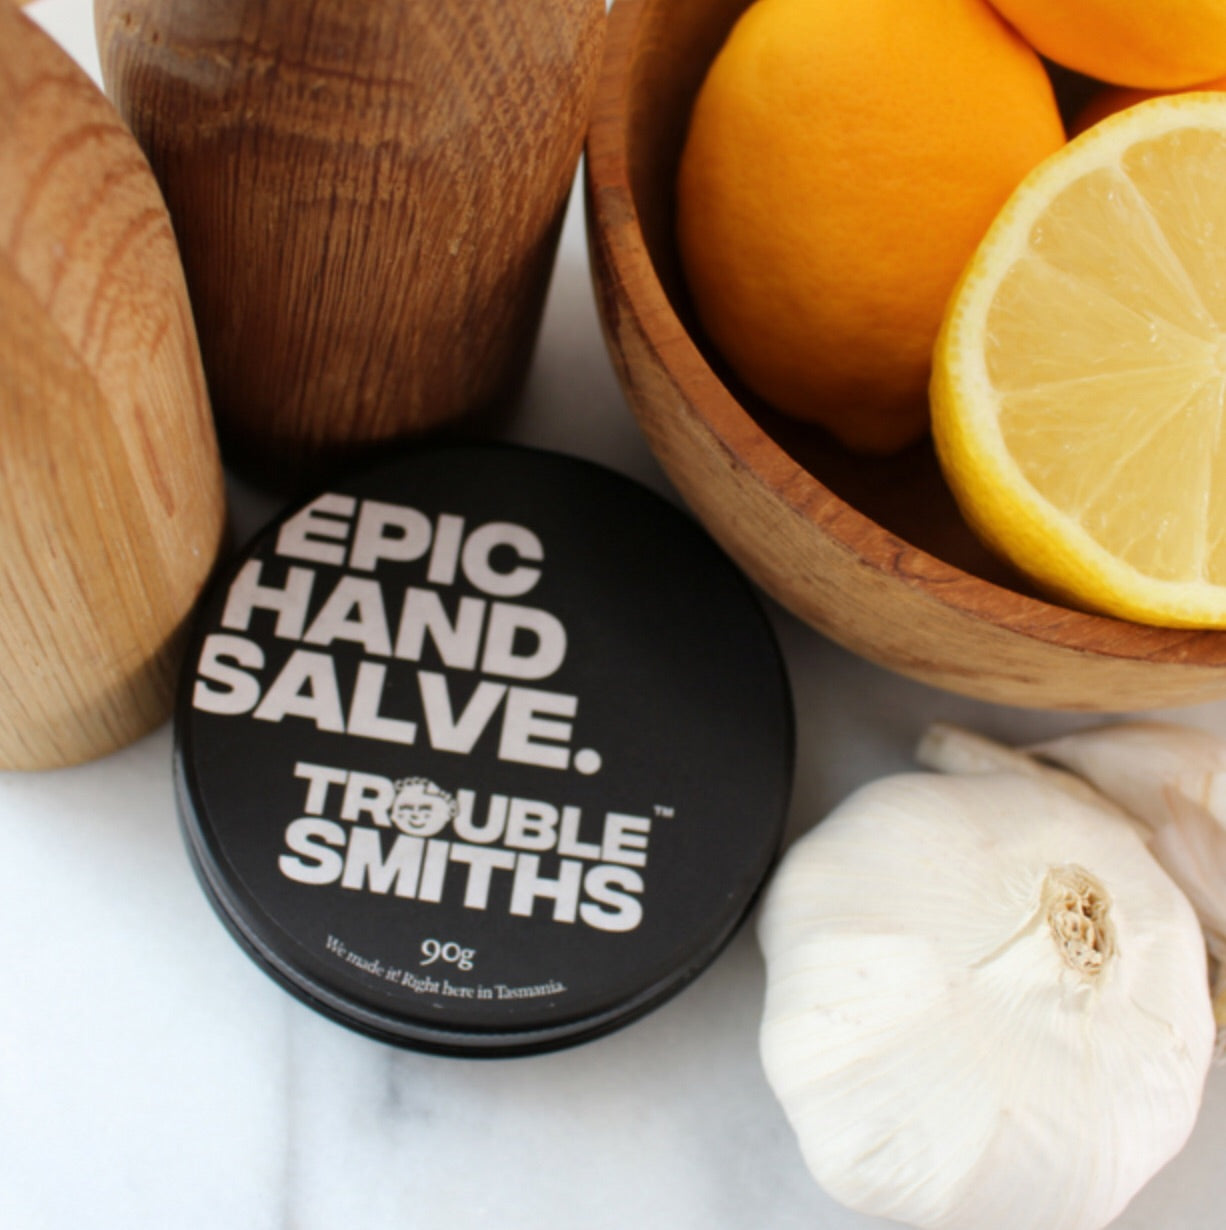 Epic Hand Salve by Trouble Smiths body Trouble Smiths 